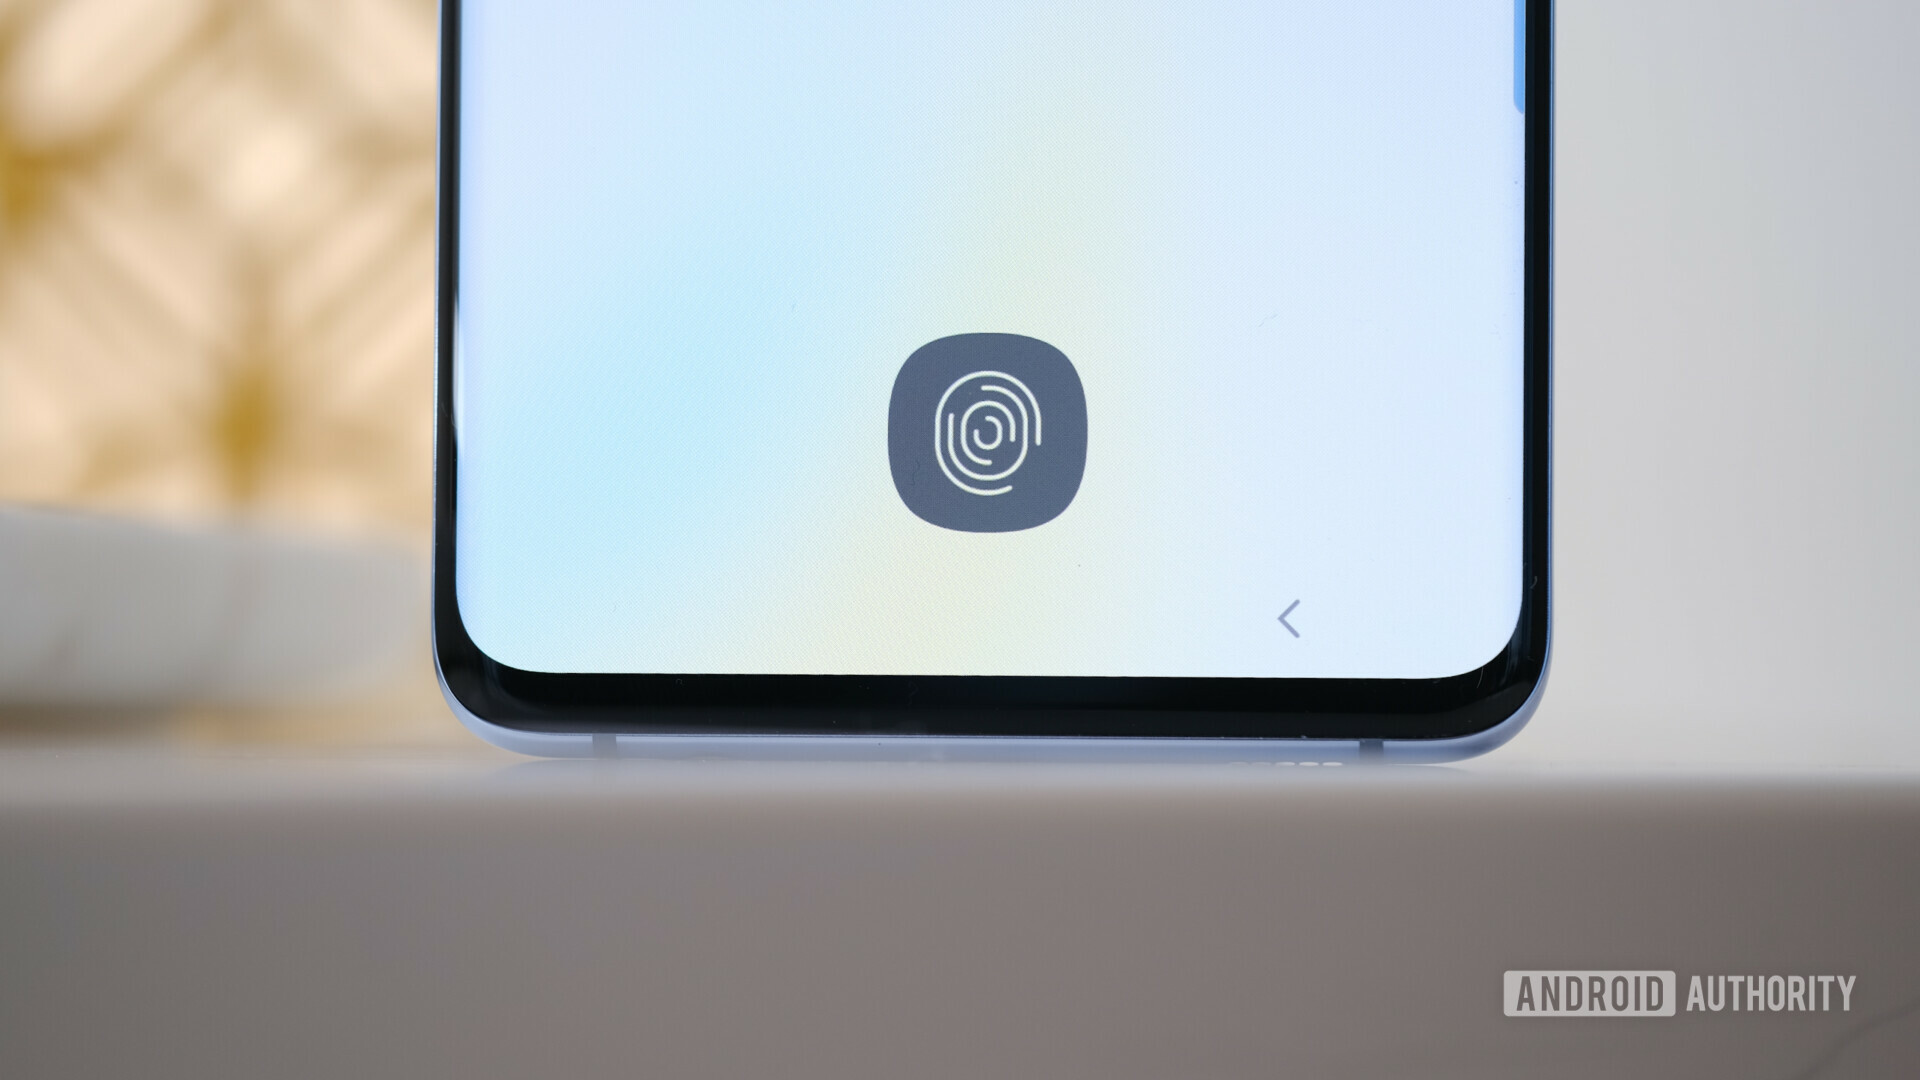 Photo of the Samsung Galaxy S10 Plus focusing on the in-display Fingerprint reader